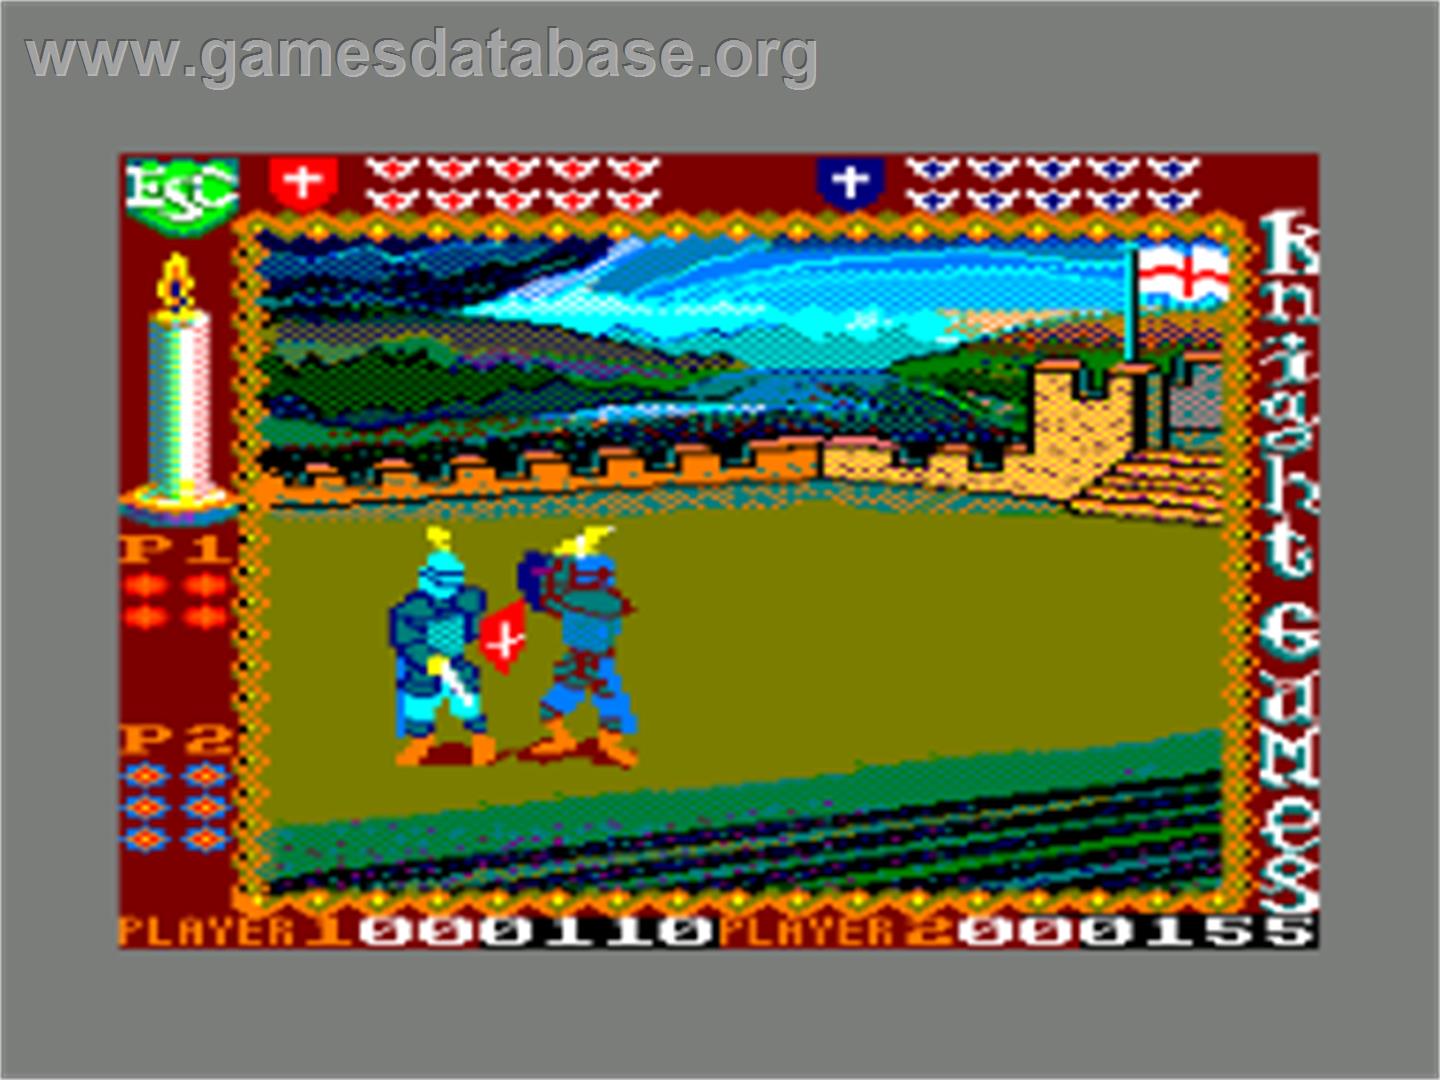 Knight Games - Amstrad CPC - Artwork - In Game